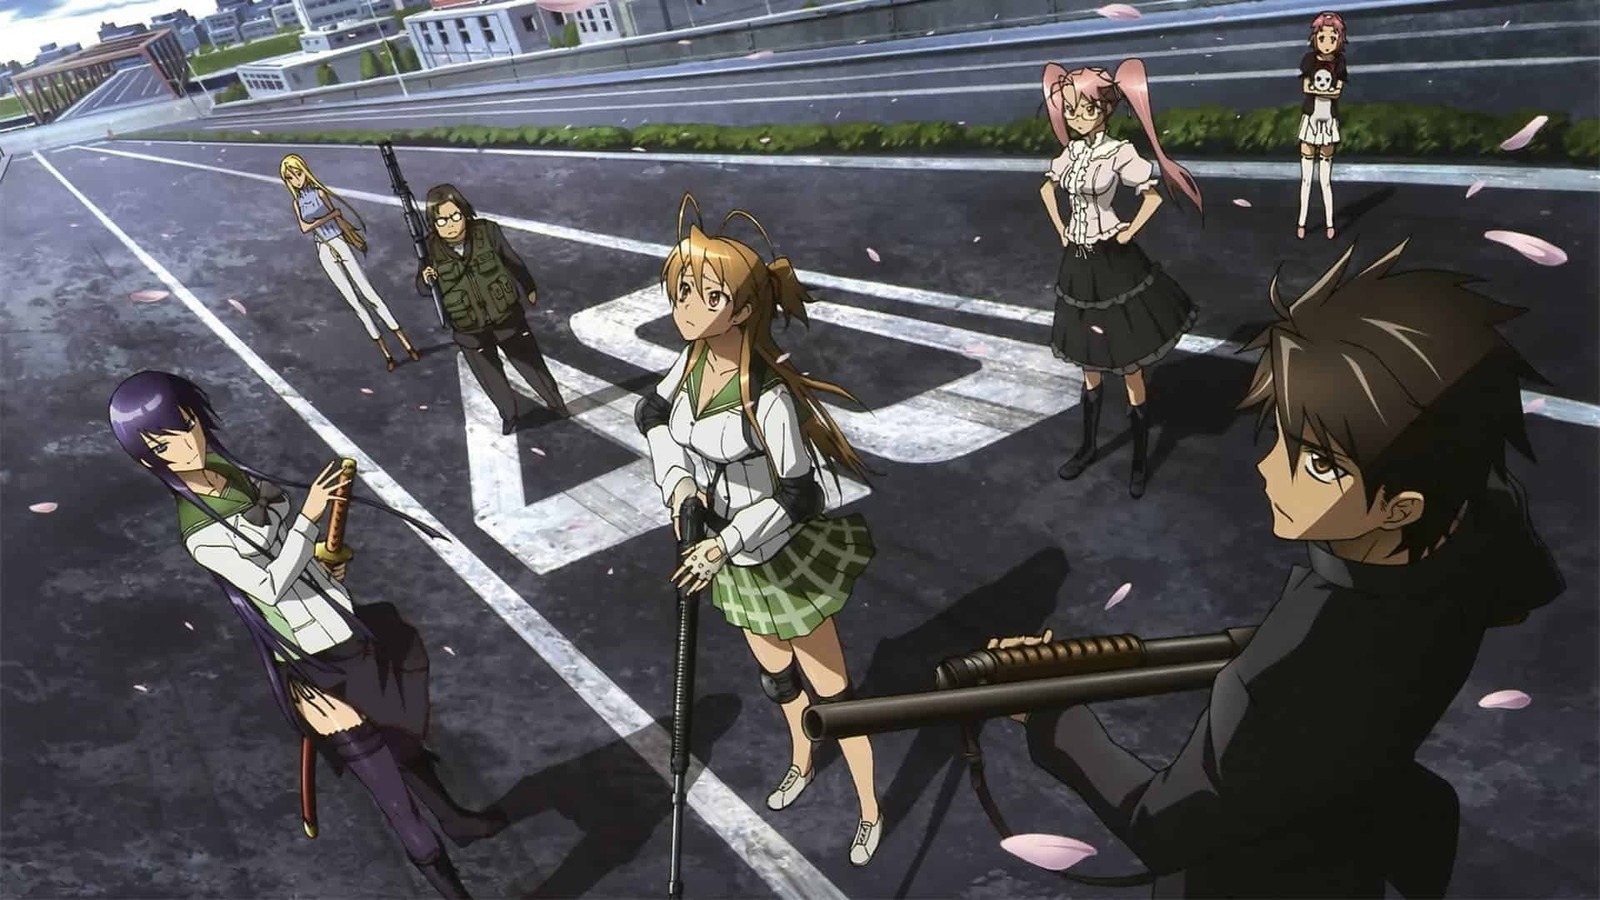 High School of The Dead Season 2: Here's What We Know • The